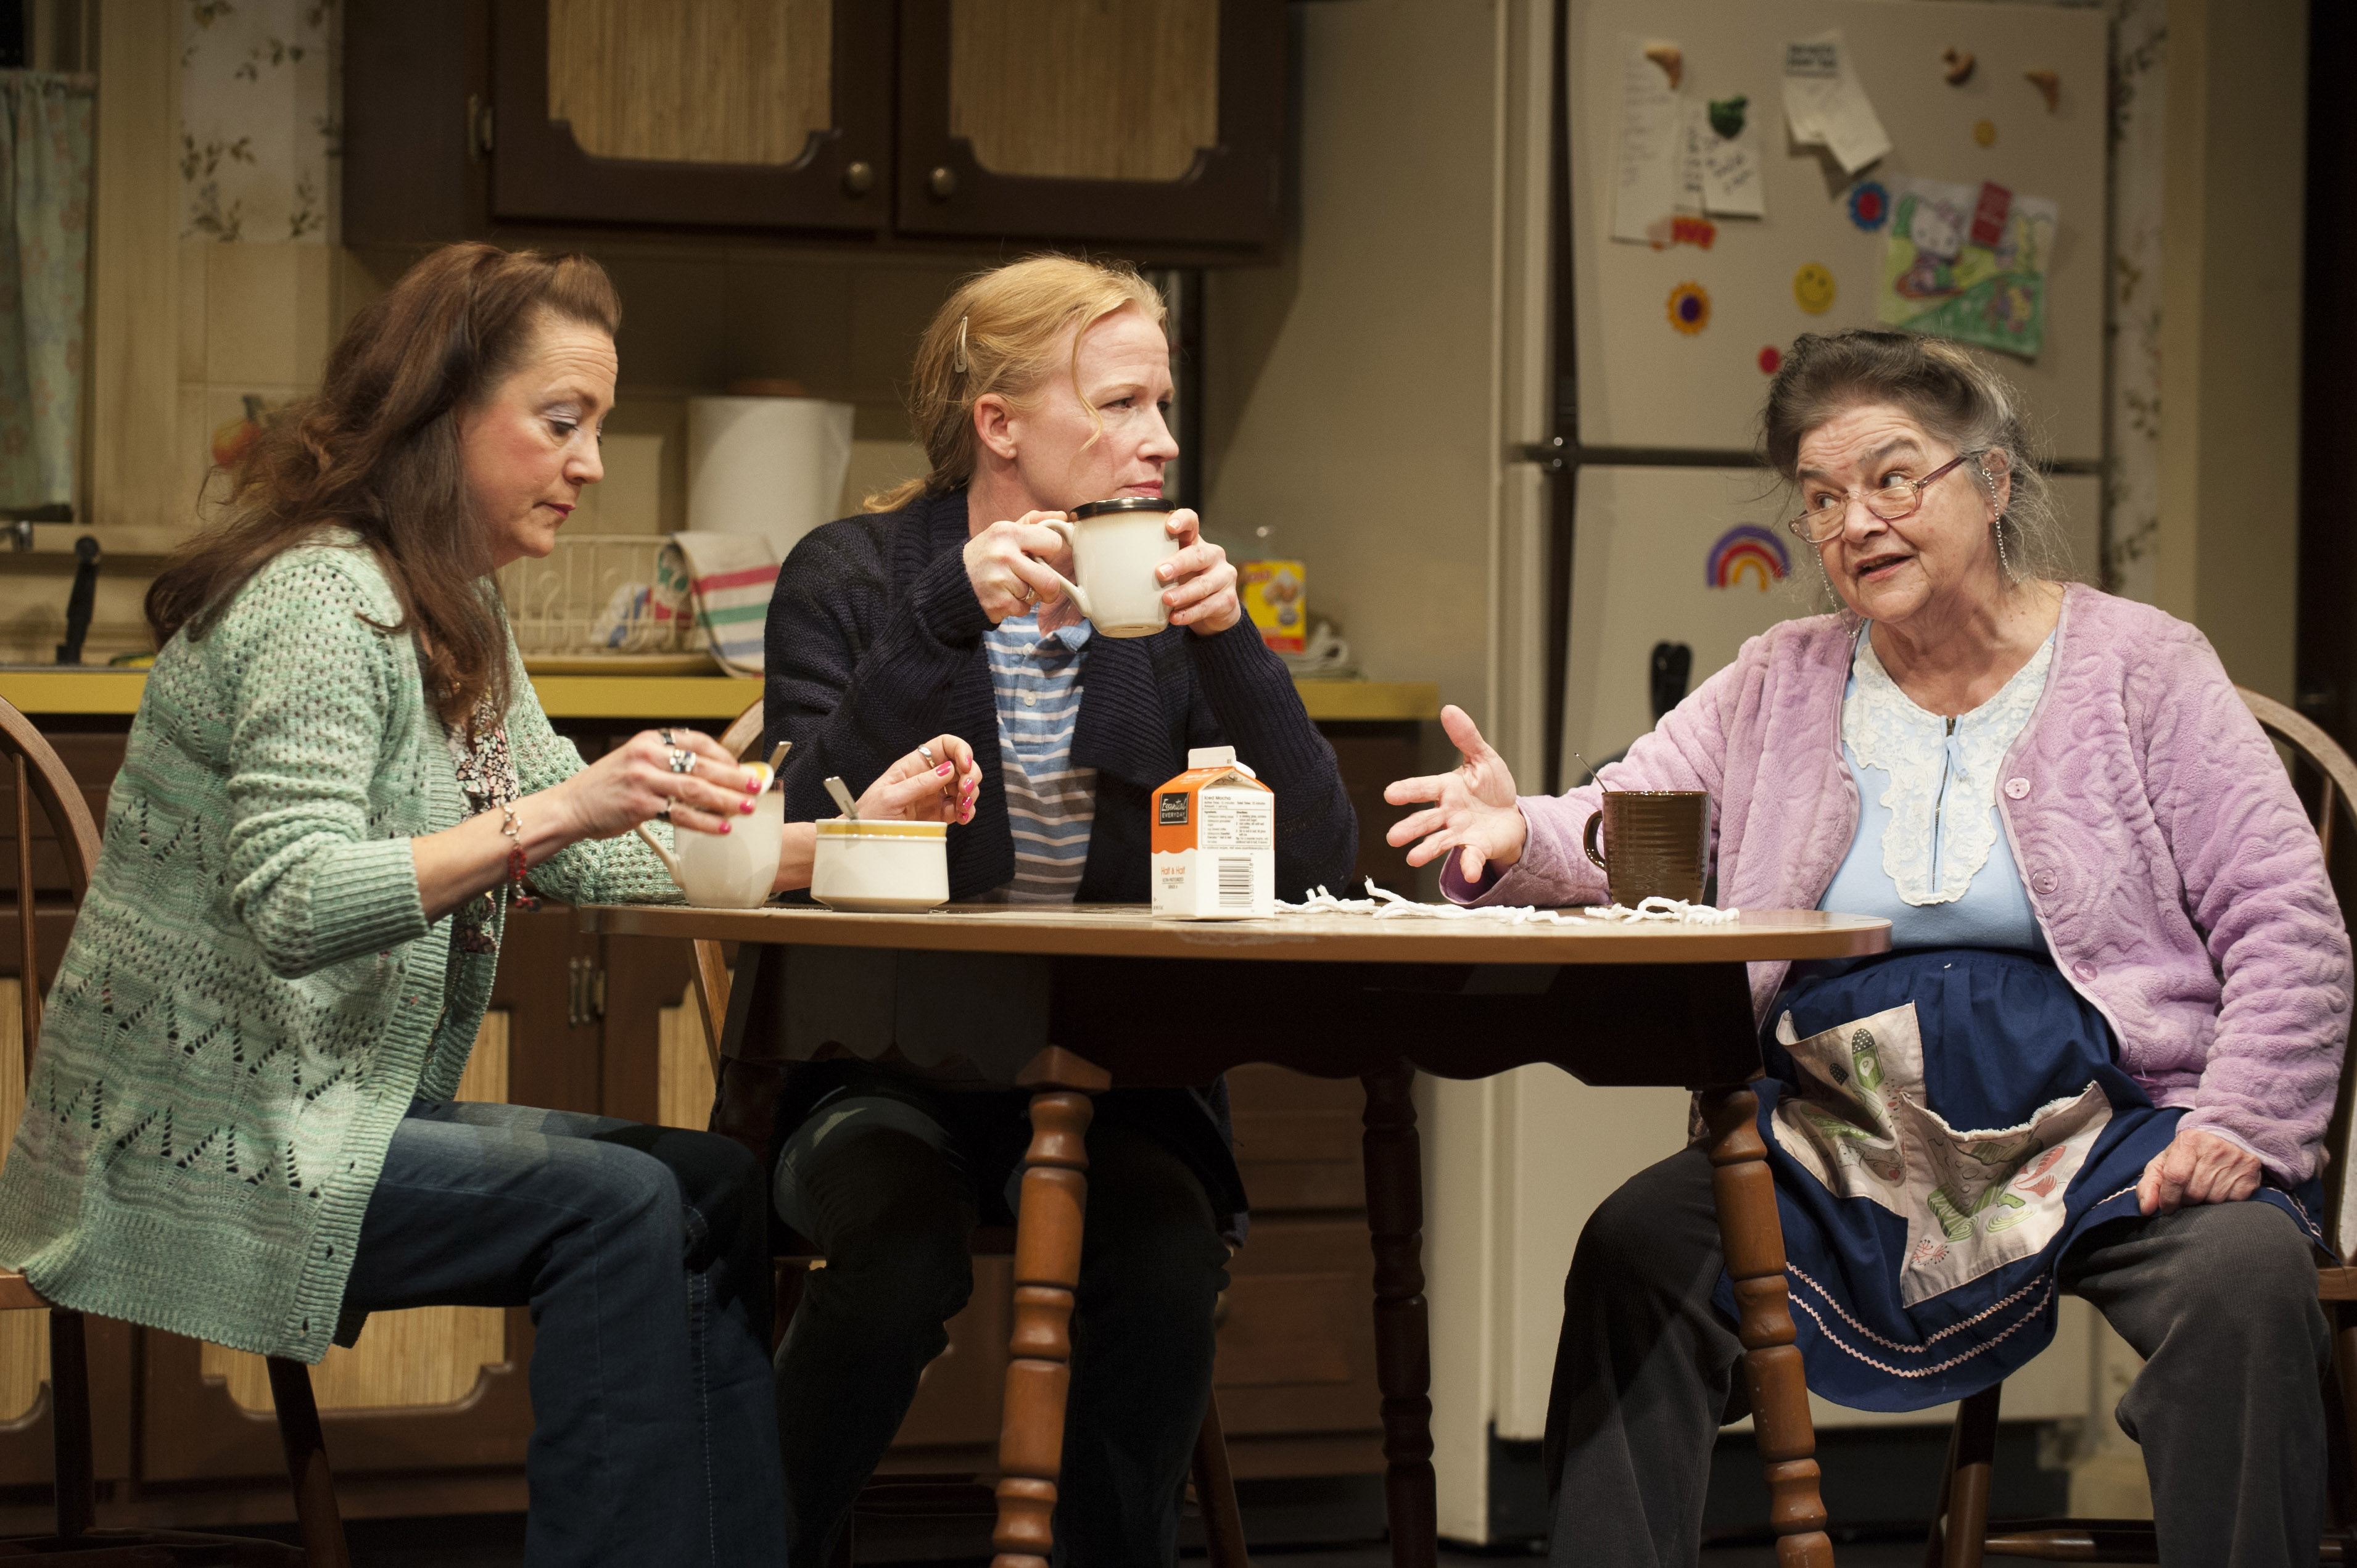 Good People Comes to Arena Stage with Tony Award Nominated Lead